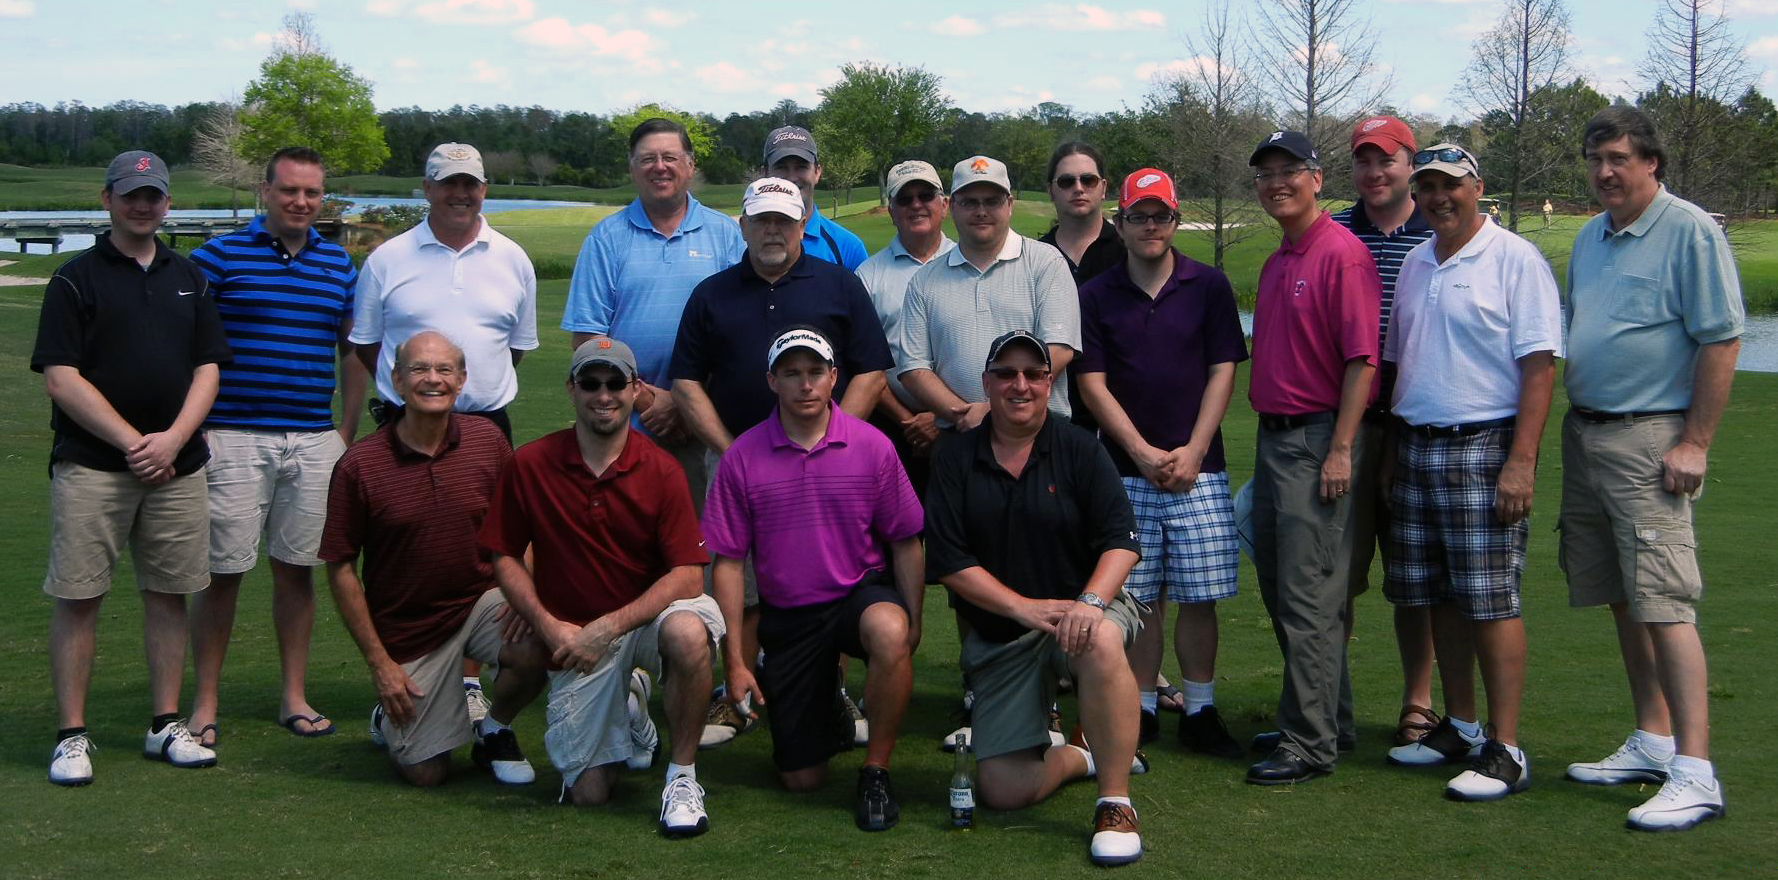 Our Golf Group